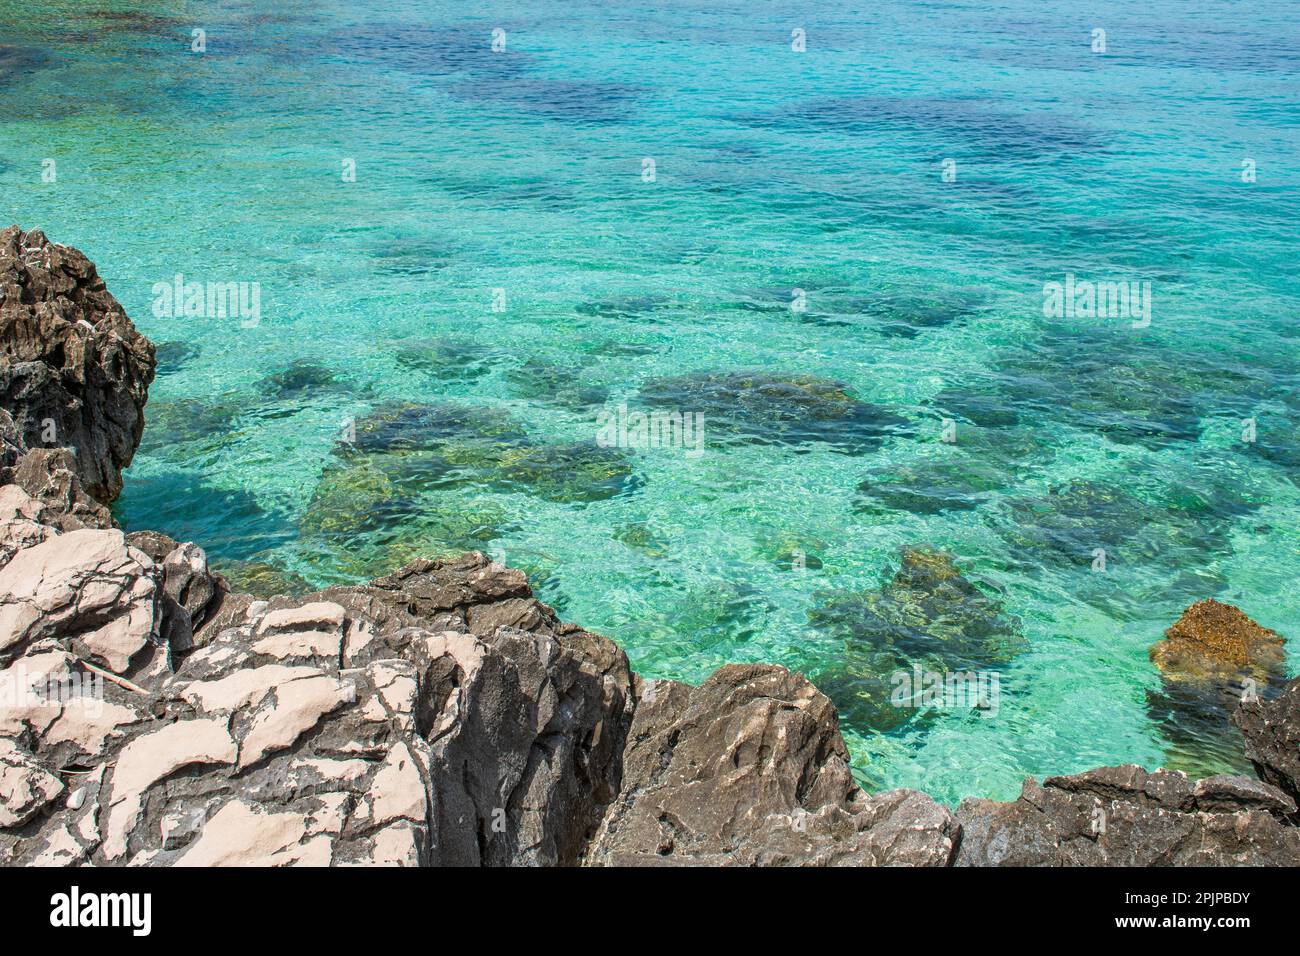 A tranquil turquoise body of water with a rocky shore in the foreground. Stock Photo